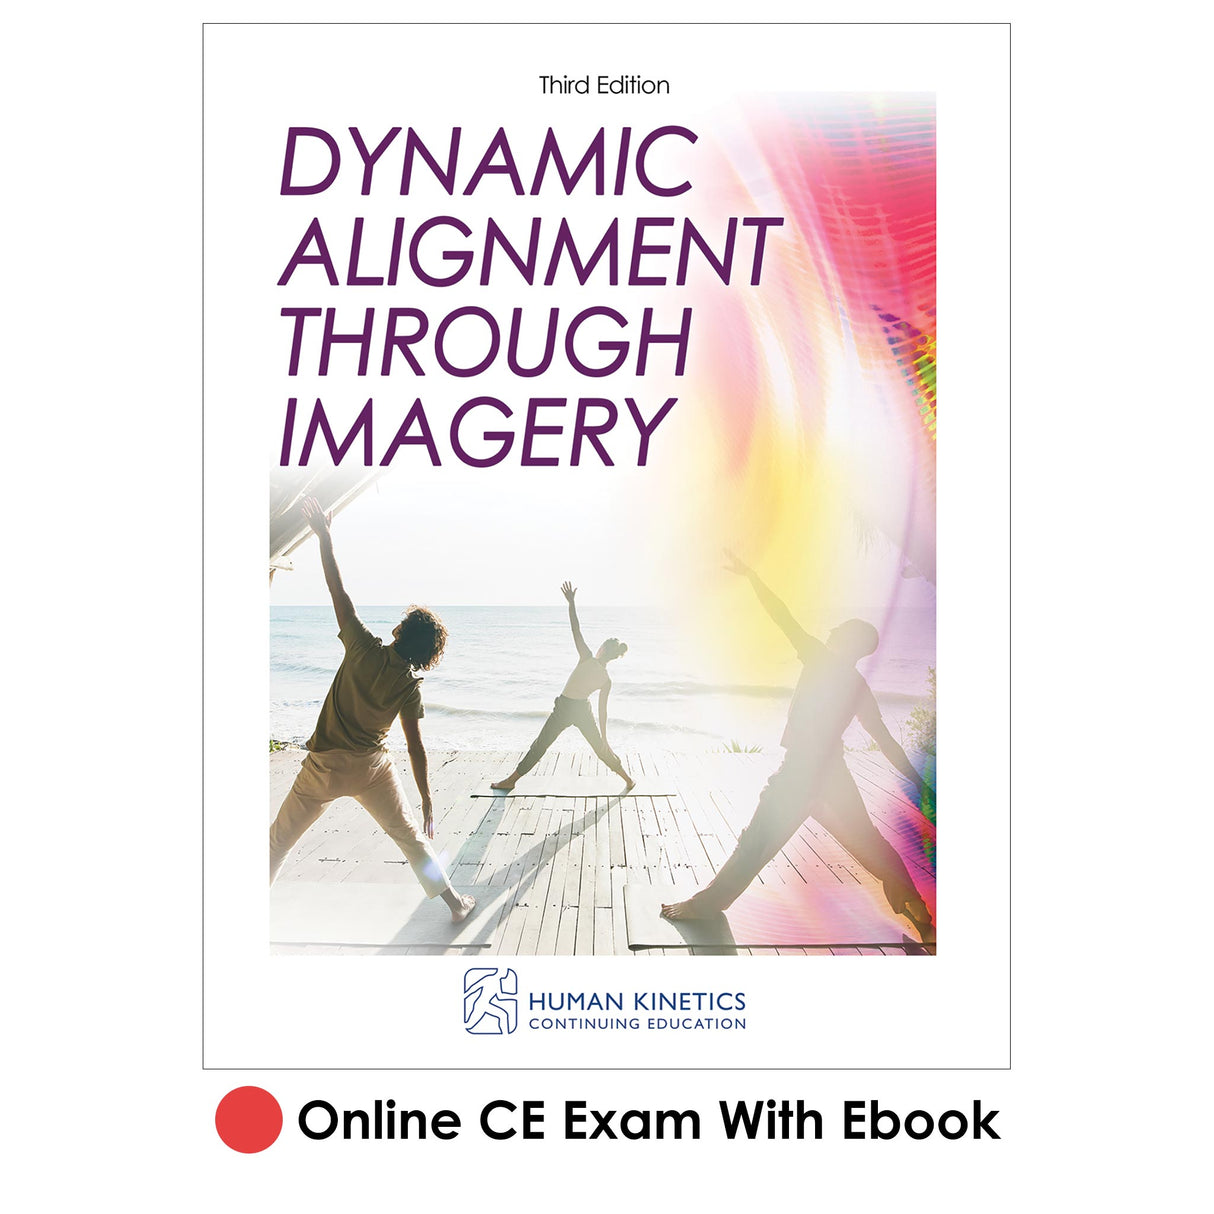 Dynamic Alignment Through Imagery 3rd Edition Online CE Exam With Ebook